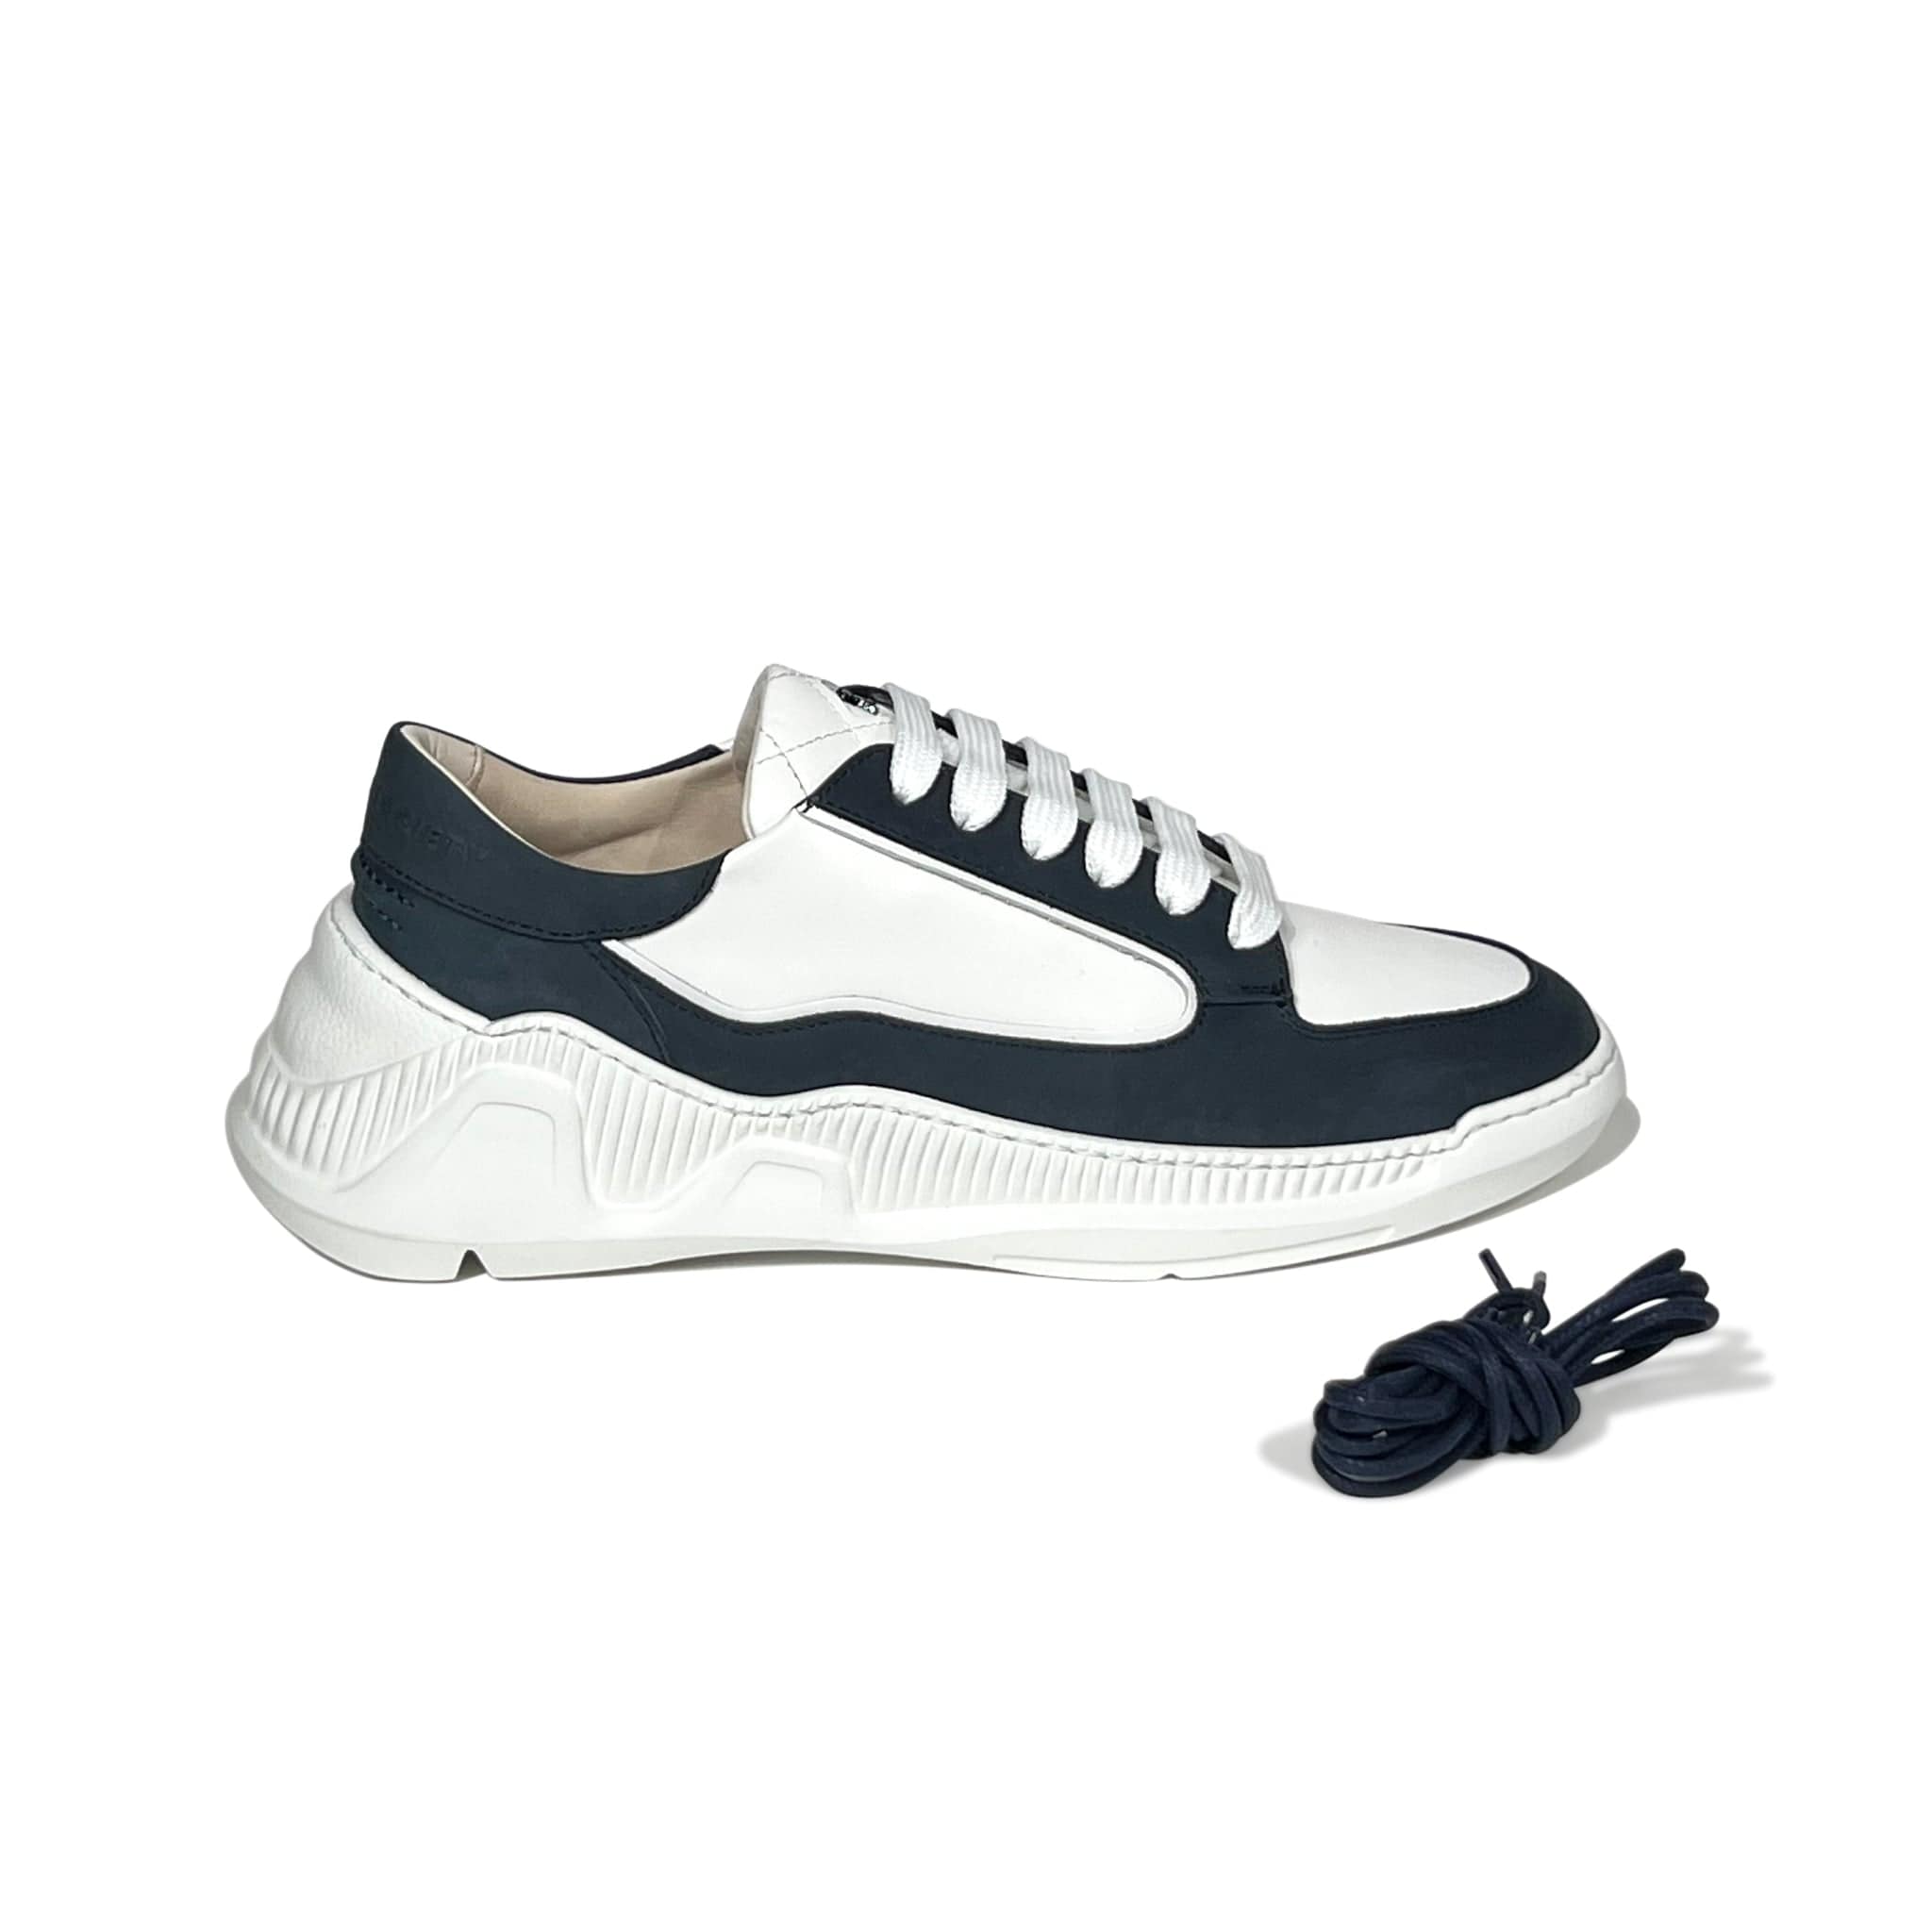 Nesto Low Top Italian Leather Sneaker | Navy and White | White Outsole | Made in Italy